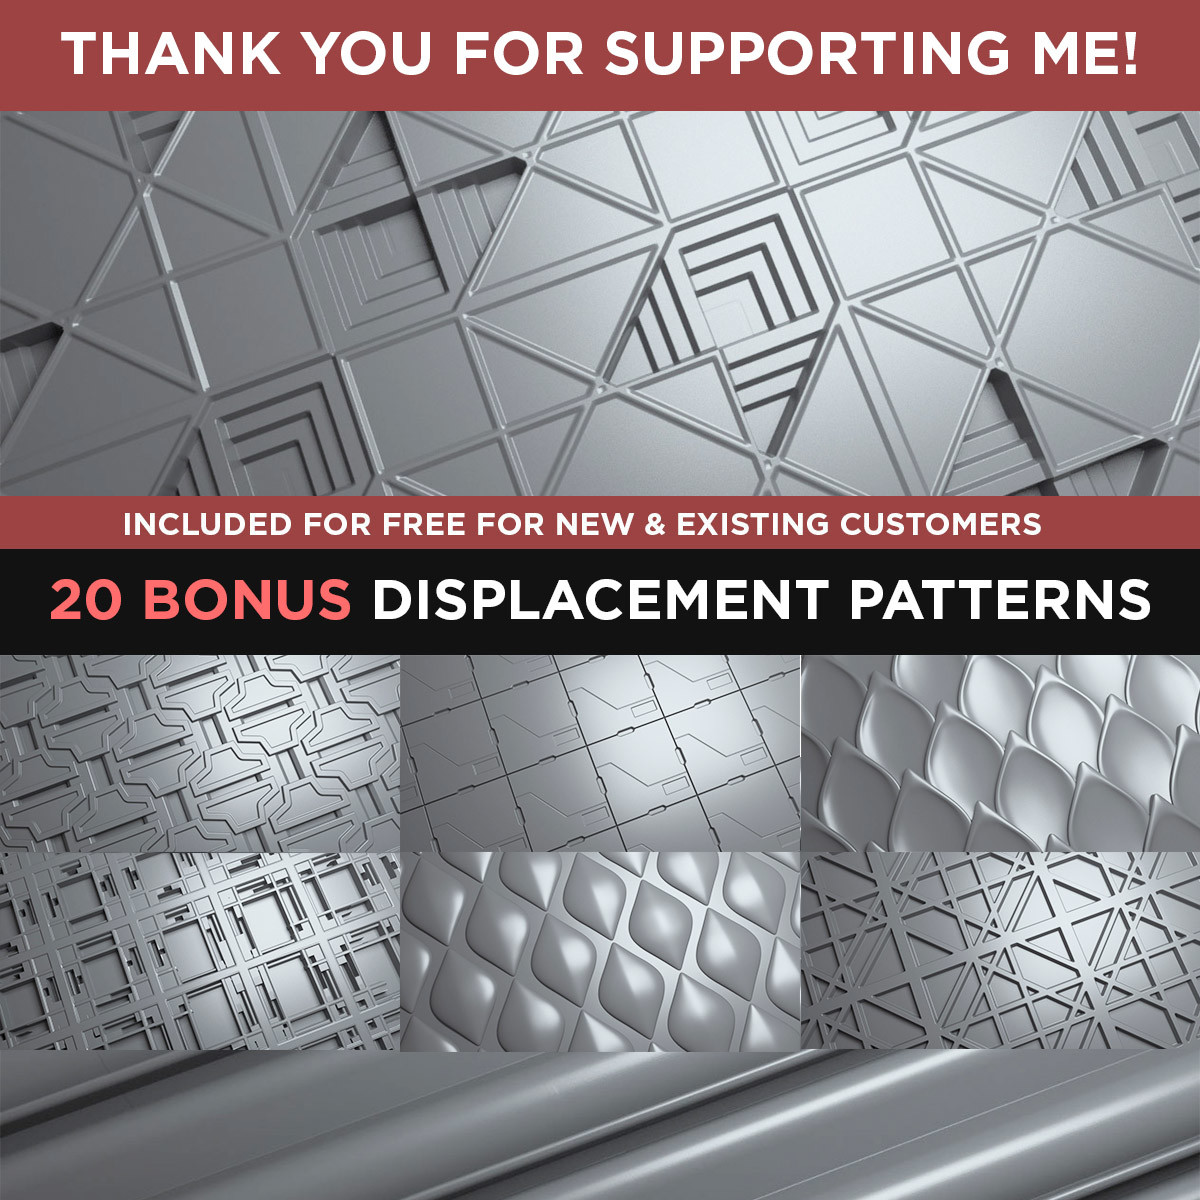 20 BONUS DISPLACEMENT PATTERNS + A BONUS TUTORIAL AVAILABLE FOR EVERYONE THAT OWNS THE COMPLETE PACK. That brings the grand total to 145. 